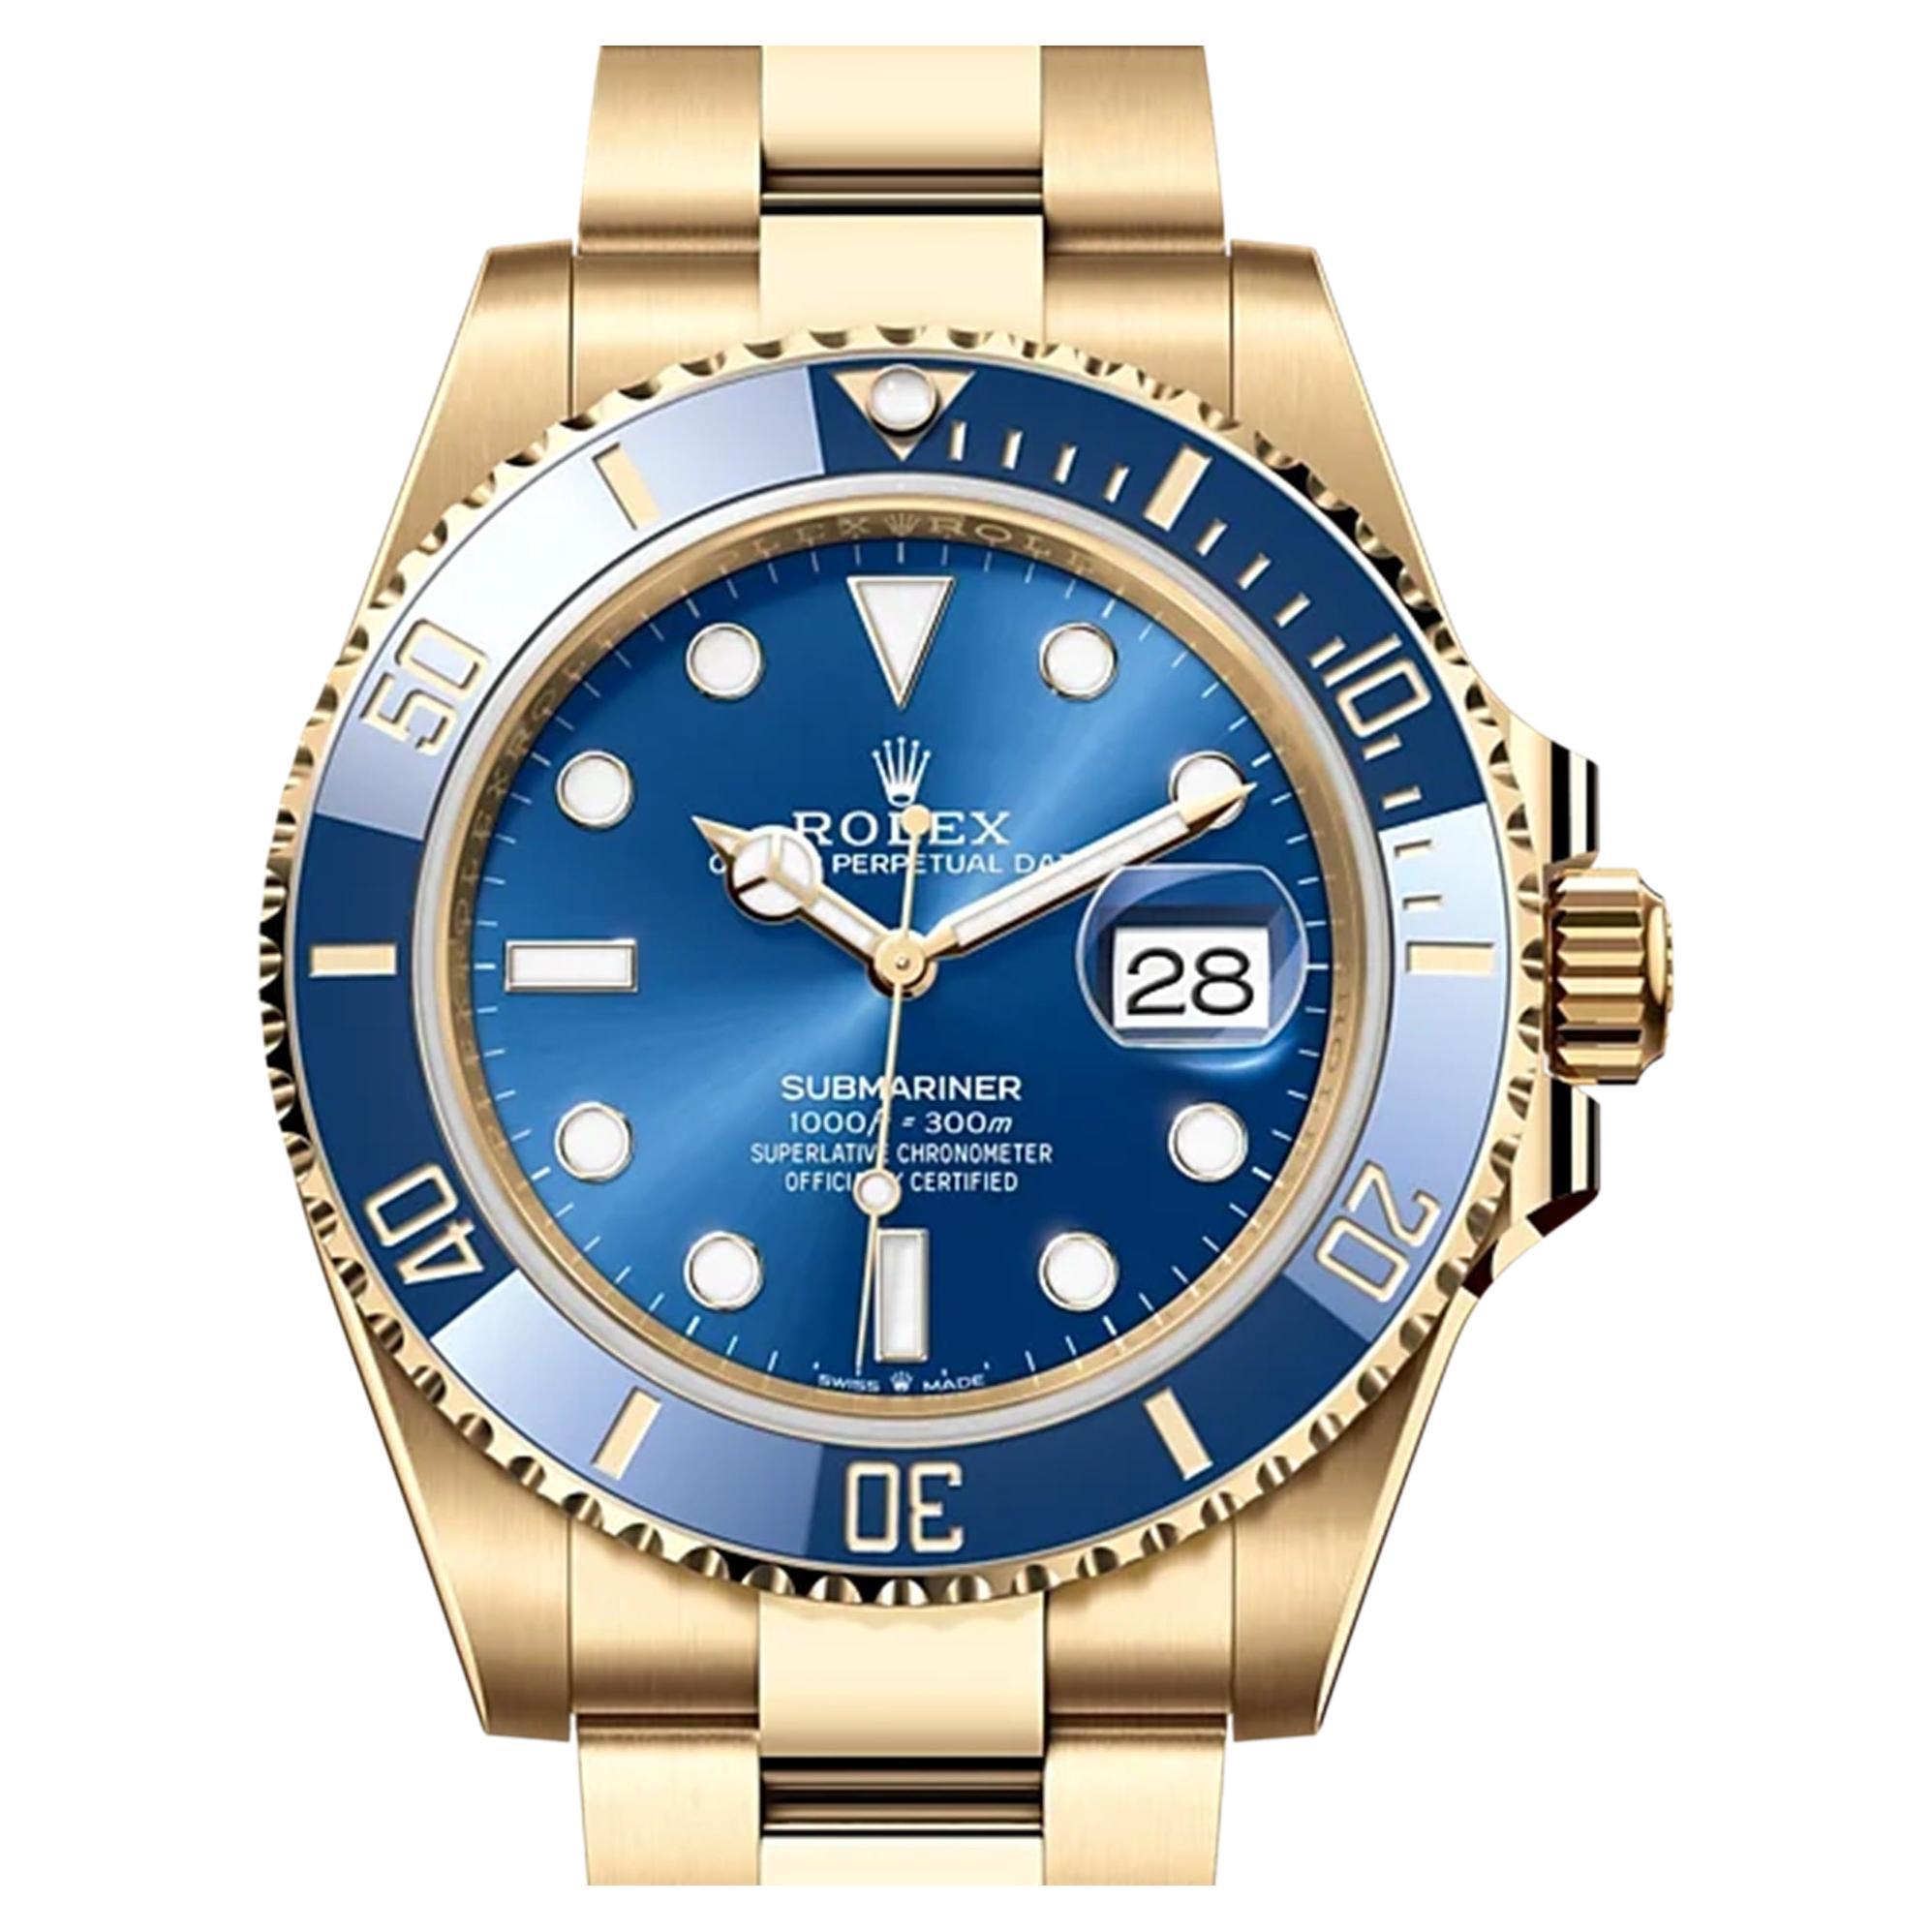 Men's Rolex Gold Submariner 126618LB Blue 18 Carats Yellow Gold Watch For Sale